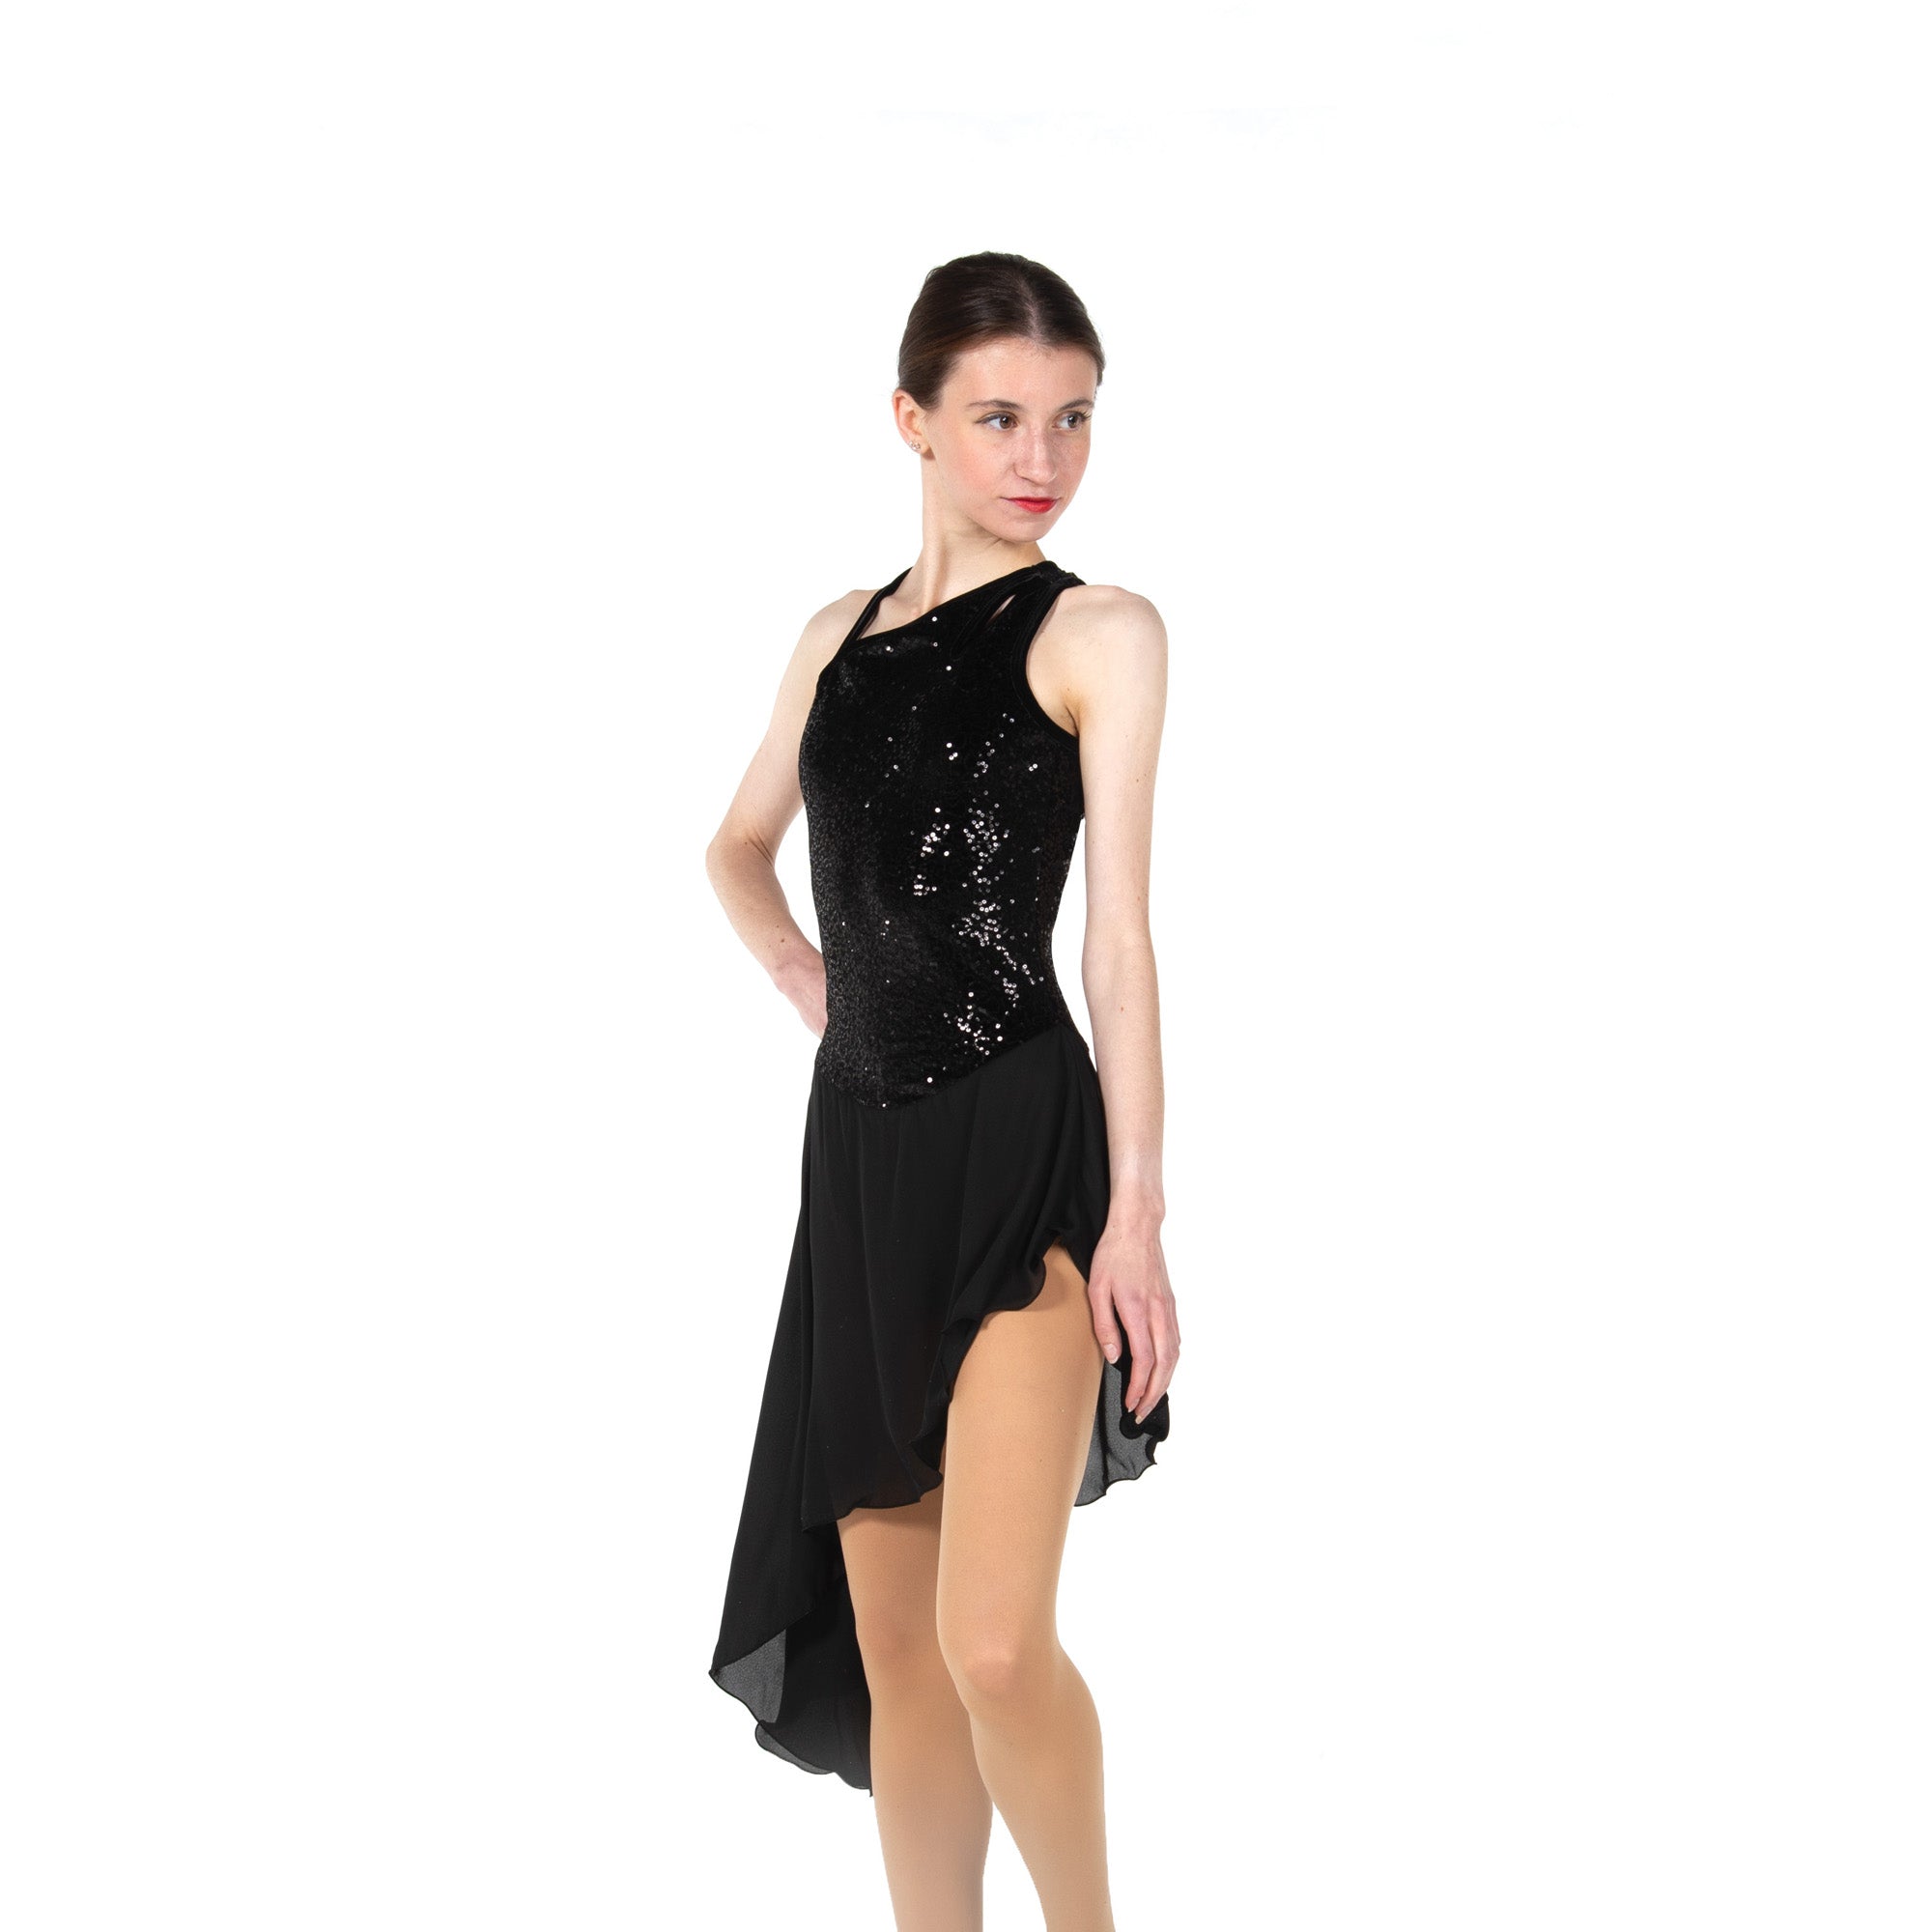 106 Sequin Chasse Dance Dress in black by Jerry's